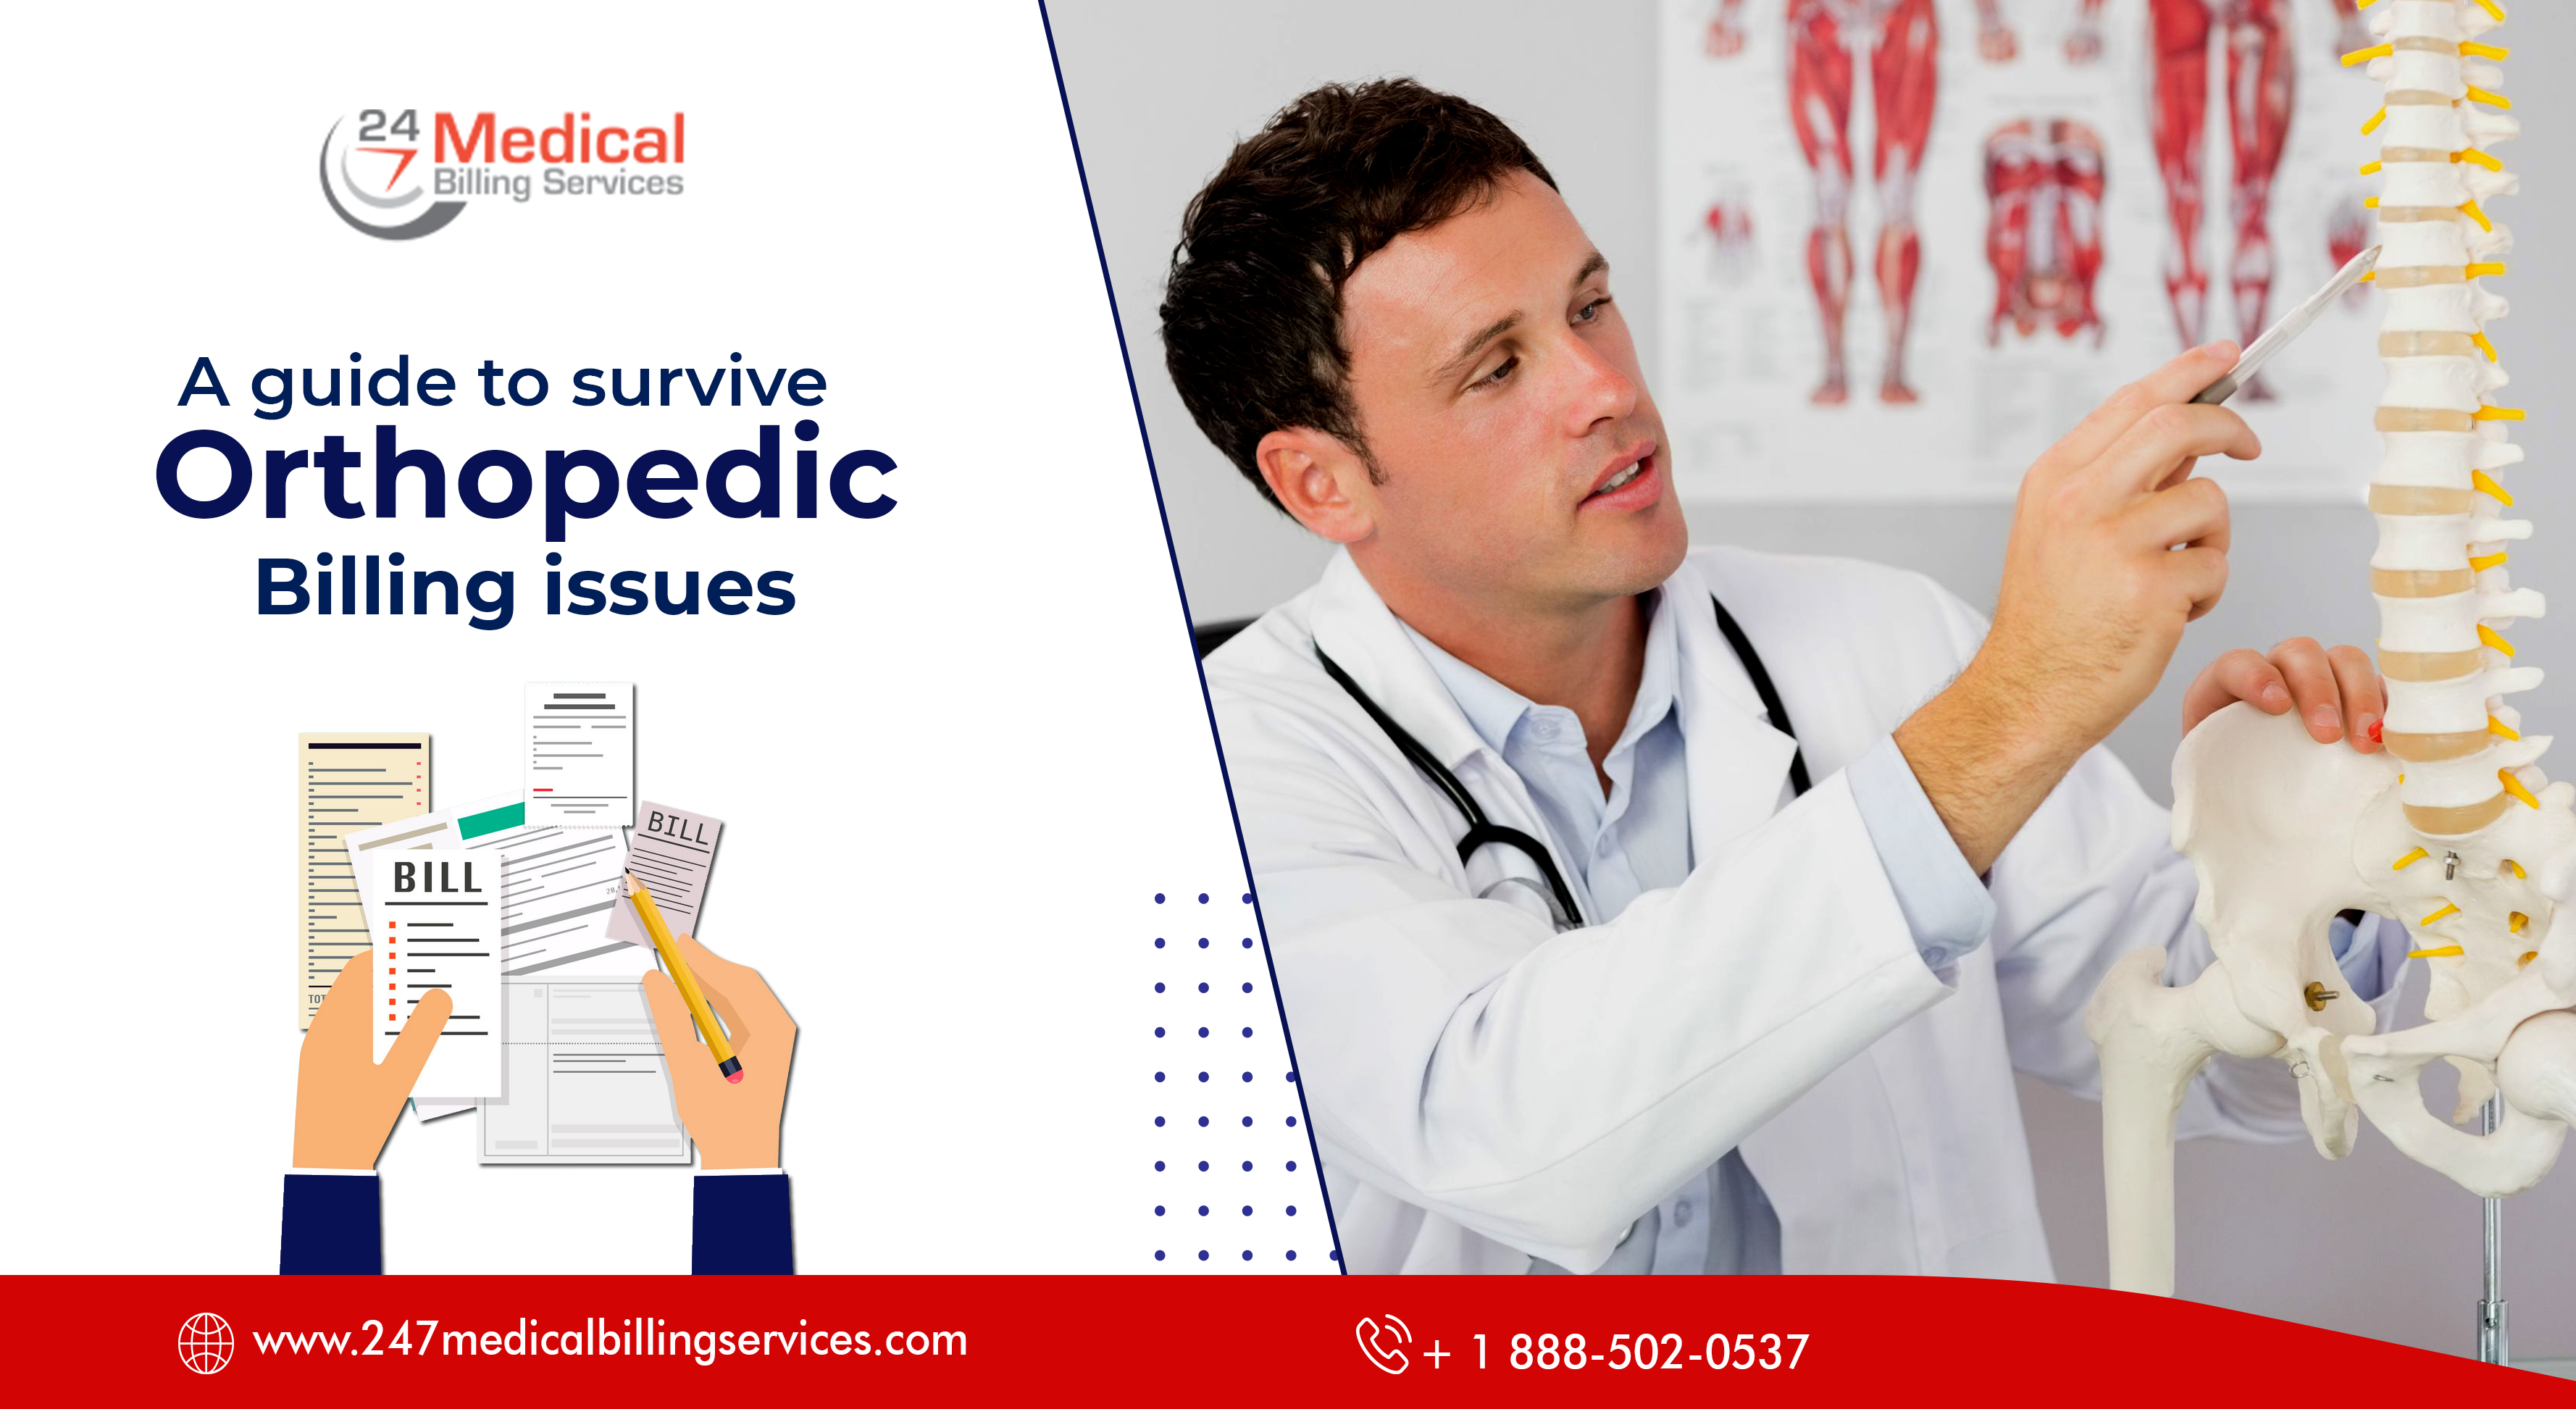  A Guide to Survive Orthopedic Billing Issues